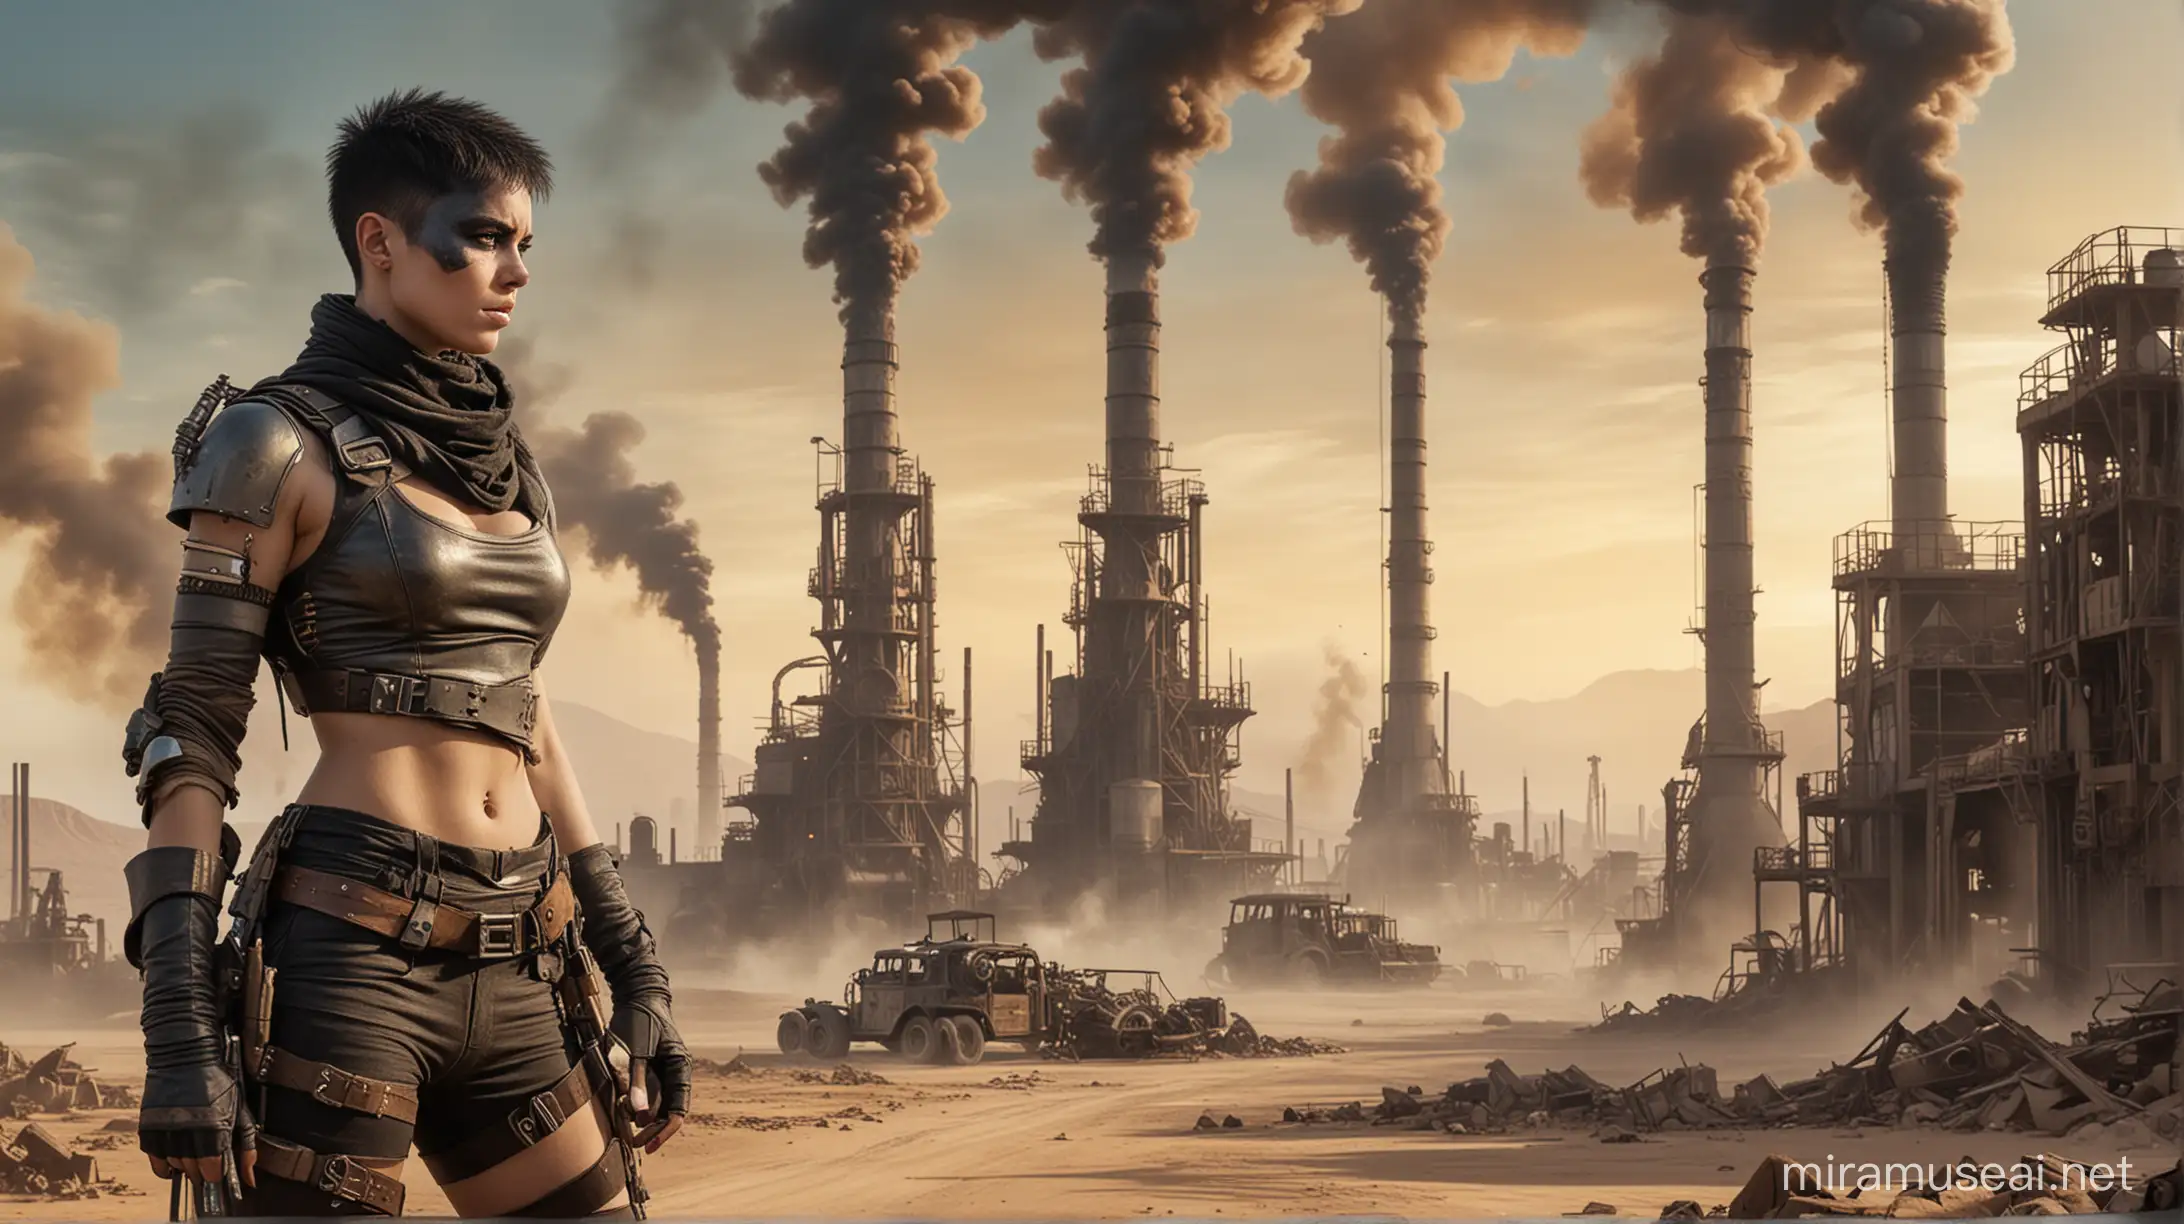 Furiosa from Mad Max Fury Road Steampunk Pilot Amidst Dilapidated Industrial Landscape